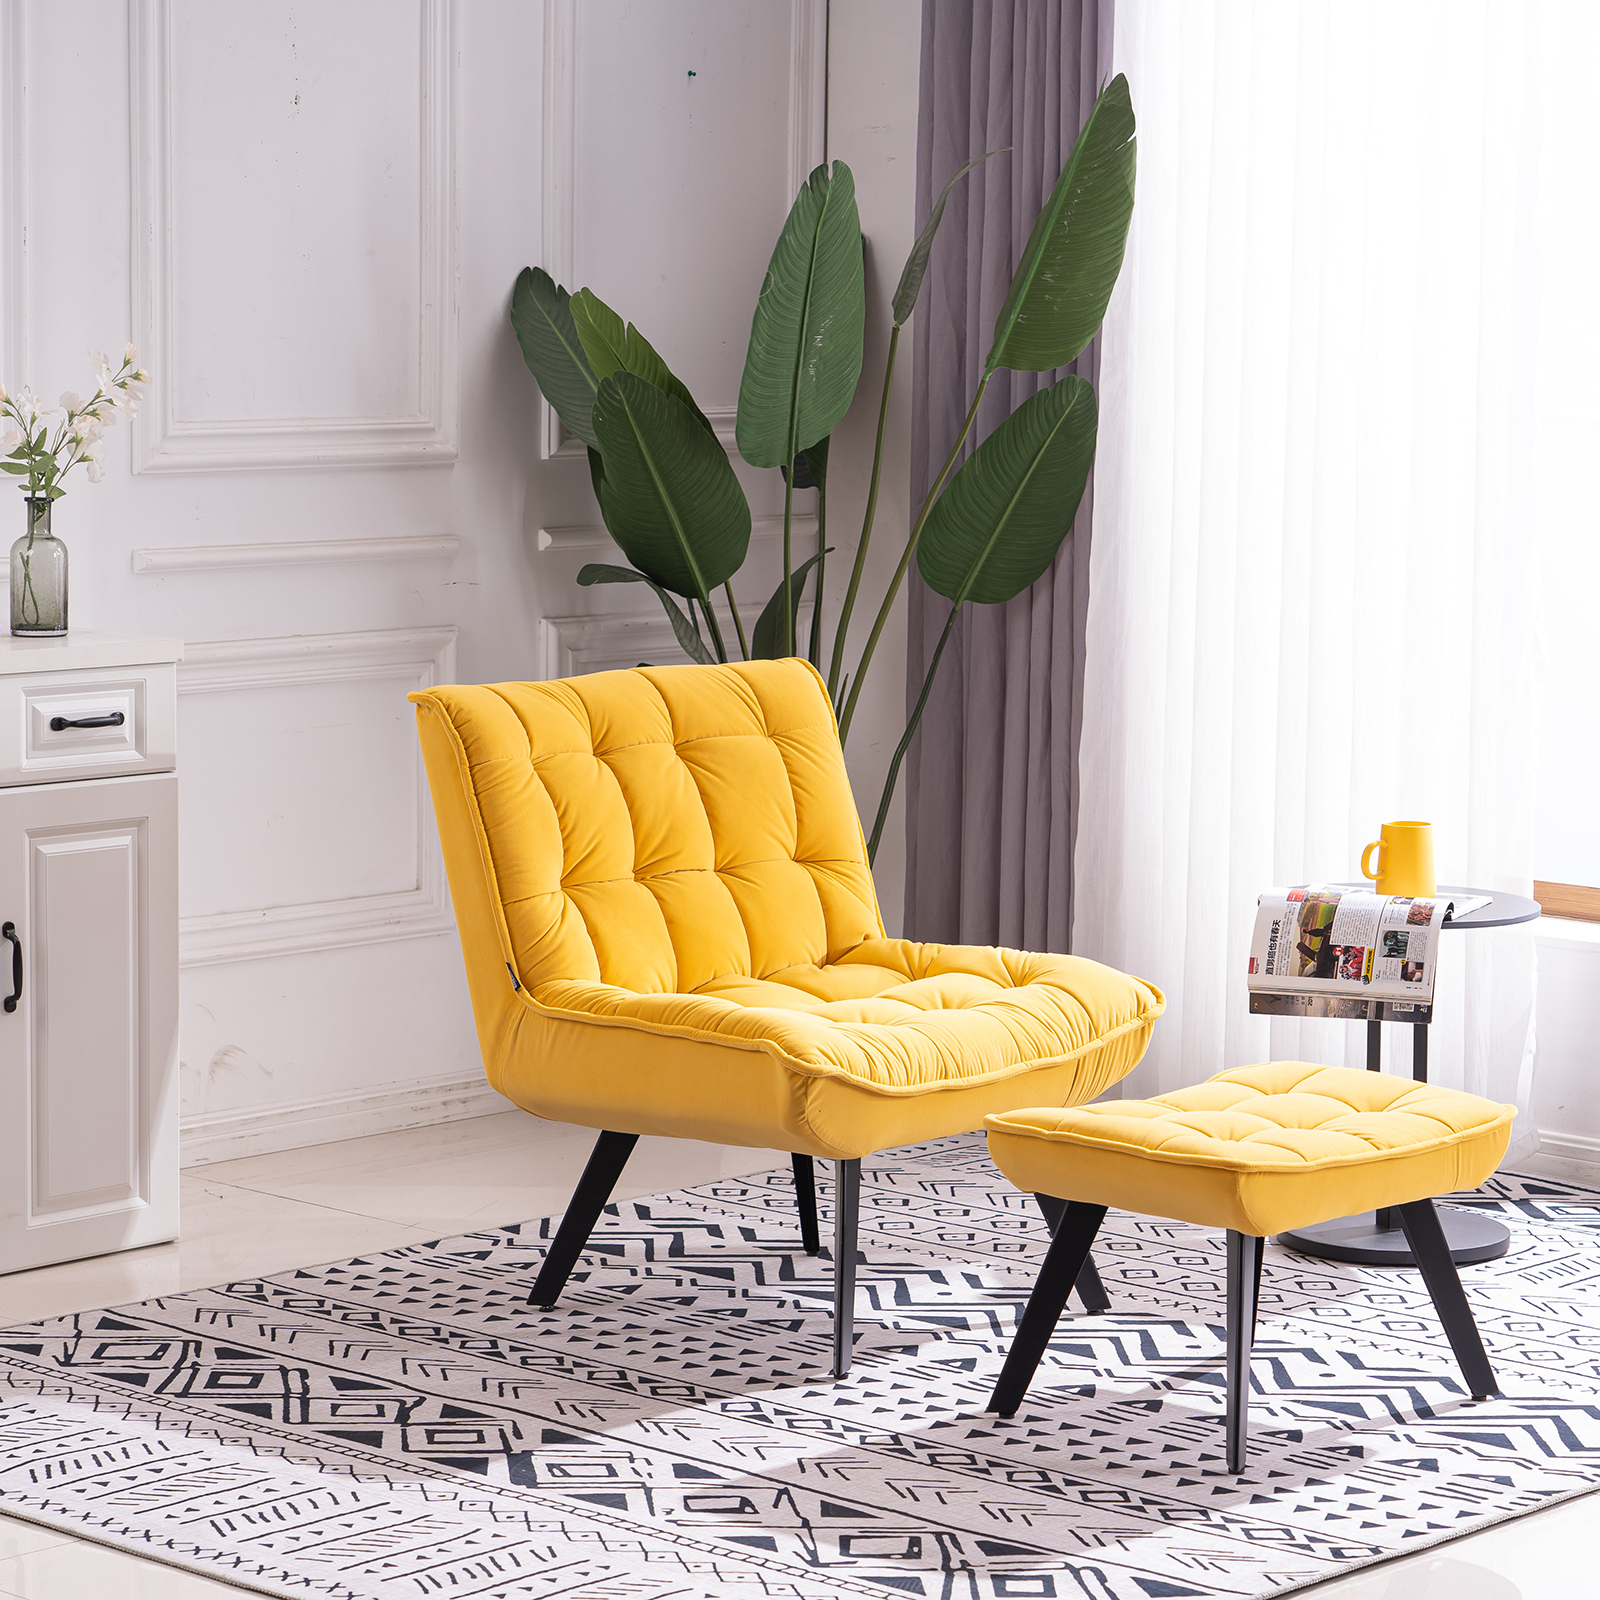 https://b2bfiles1.gigab2b.cn/image/wkseller/3374/Leisure_Chair_With_Ottoman/1950020/Yellow/With_Ottoman/20201016_7d52287f29d8df68a8524bc0aeb6ccf7.jpg